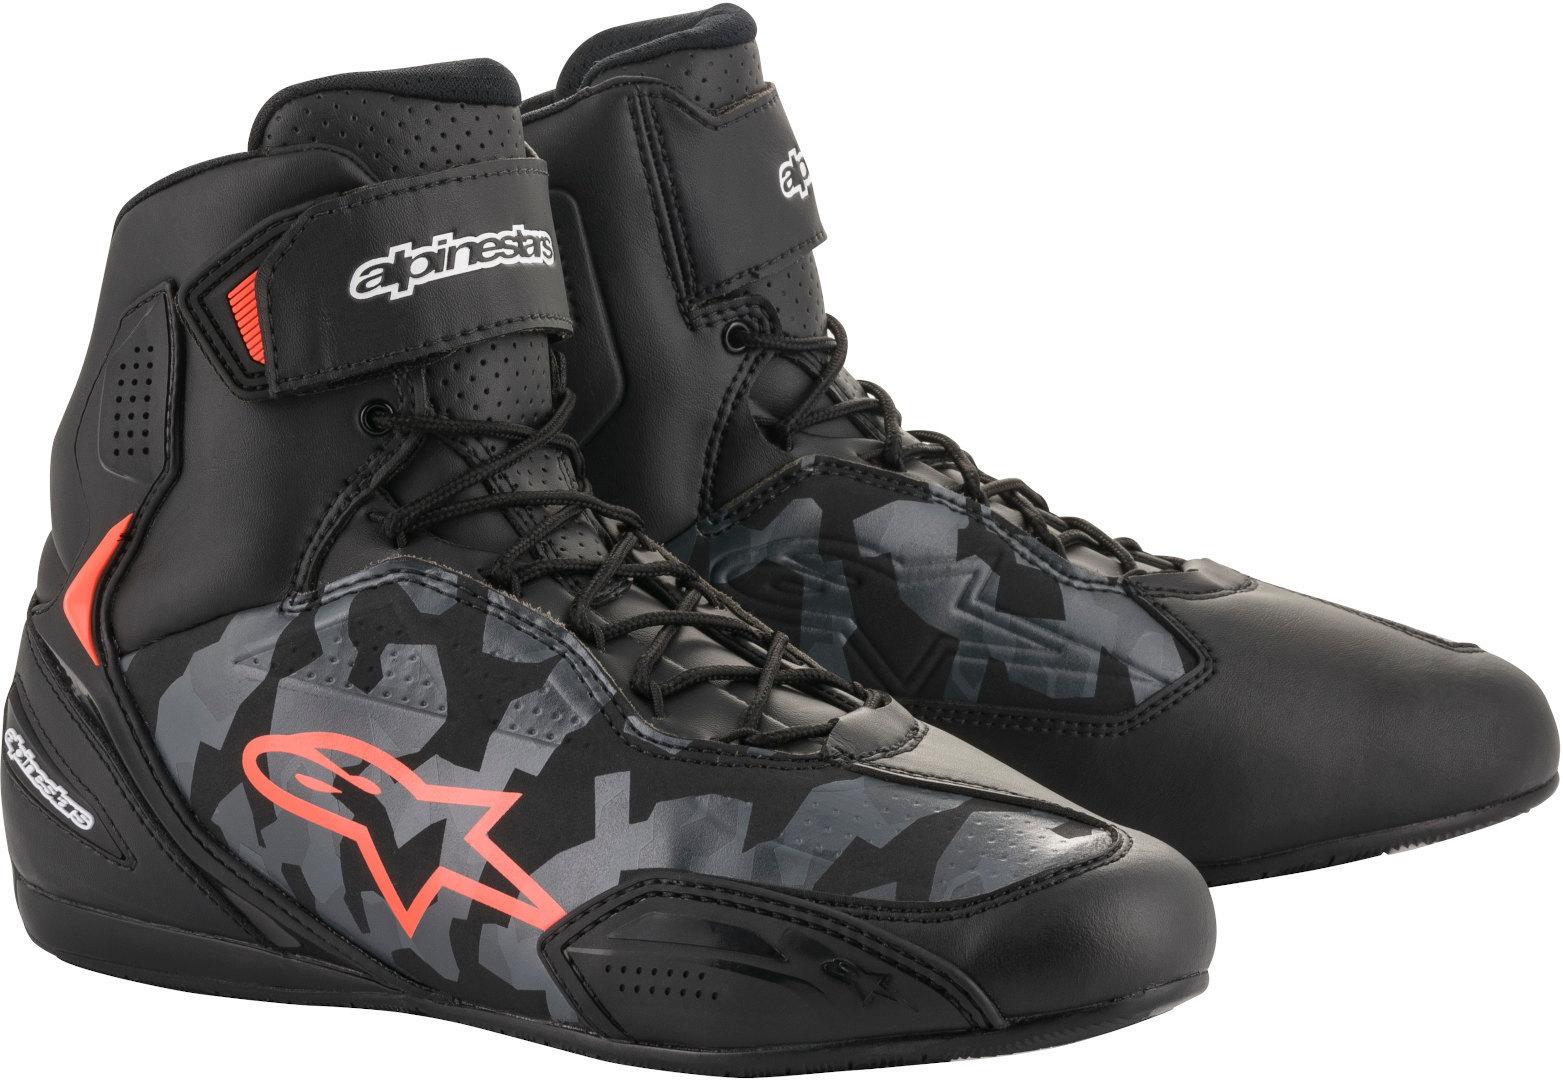 Alpinestars Faster-3 Camo Motorcycle Shoes, green-brown, Size 43, green-brown, Size 43